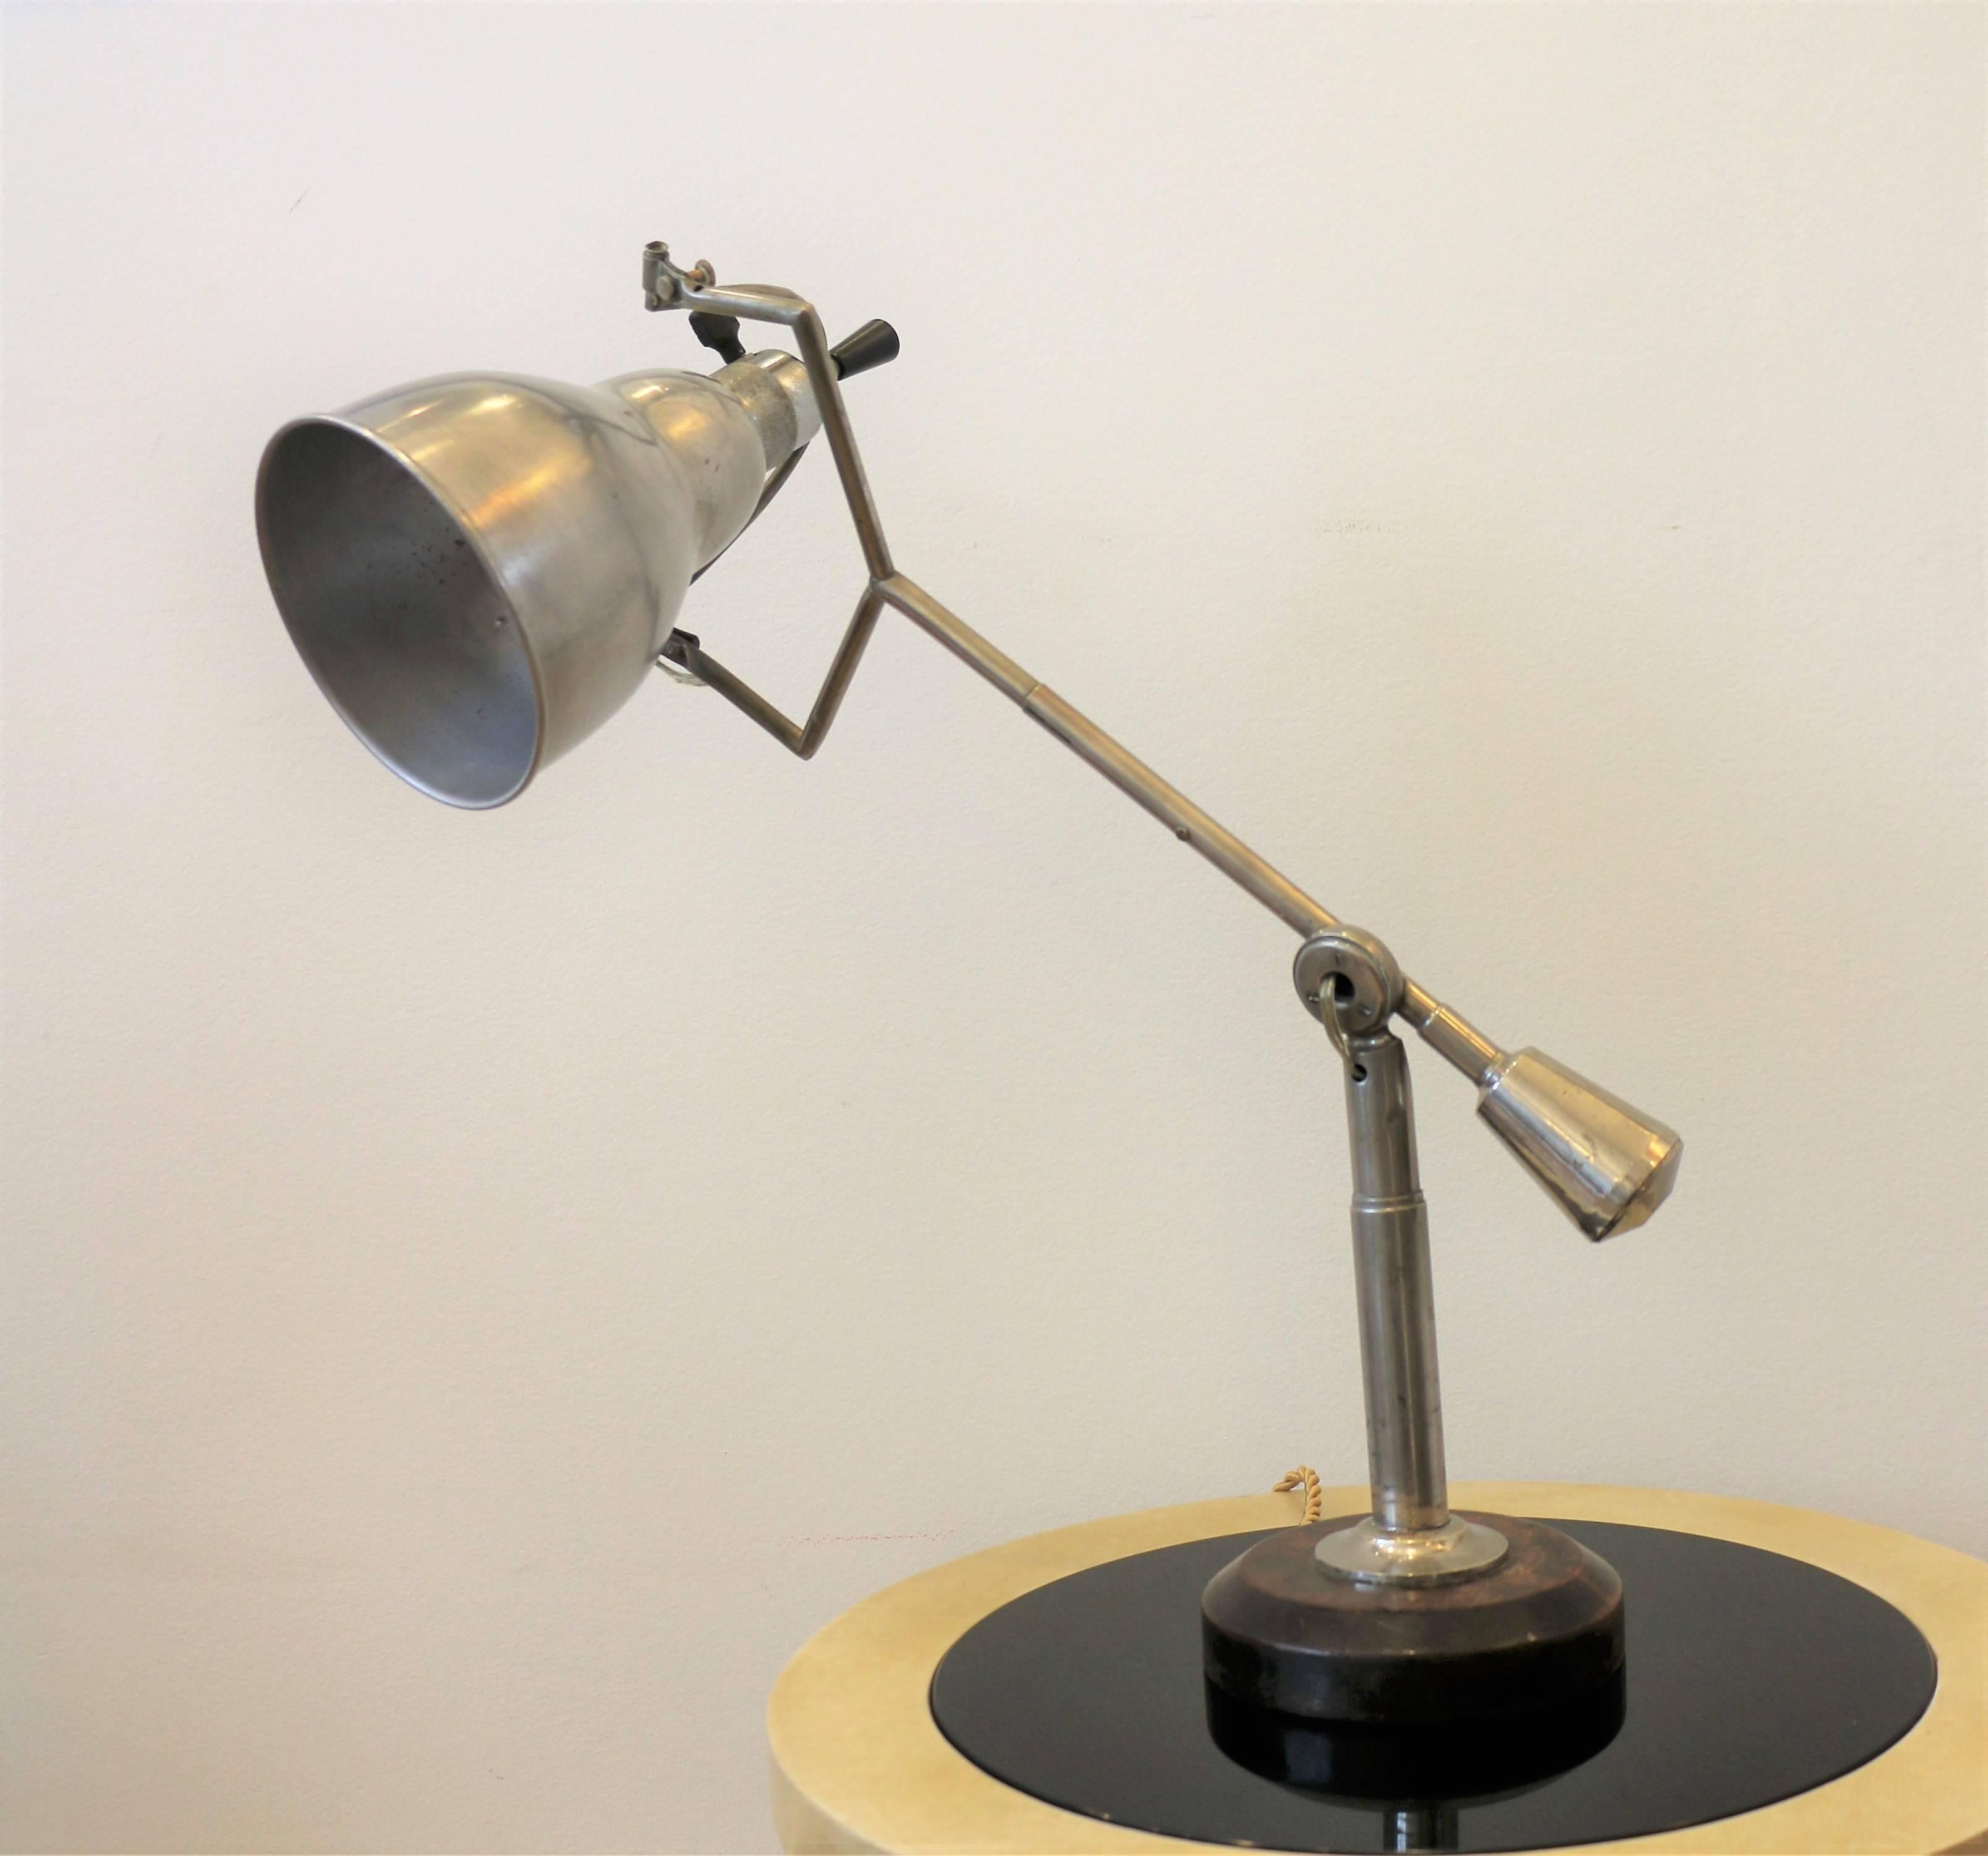 This iconic lamp is an original one and was designed by Édouard-Wilfred Buquet (1886-?). It is an articulated lamp with one arm. It is balanced like a mobile with an adjustable counterweight. It is made of aluminium (for the shade), nickel-plated